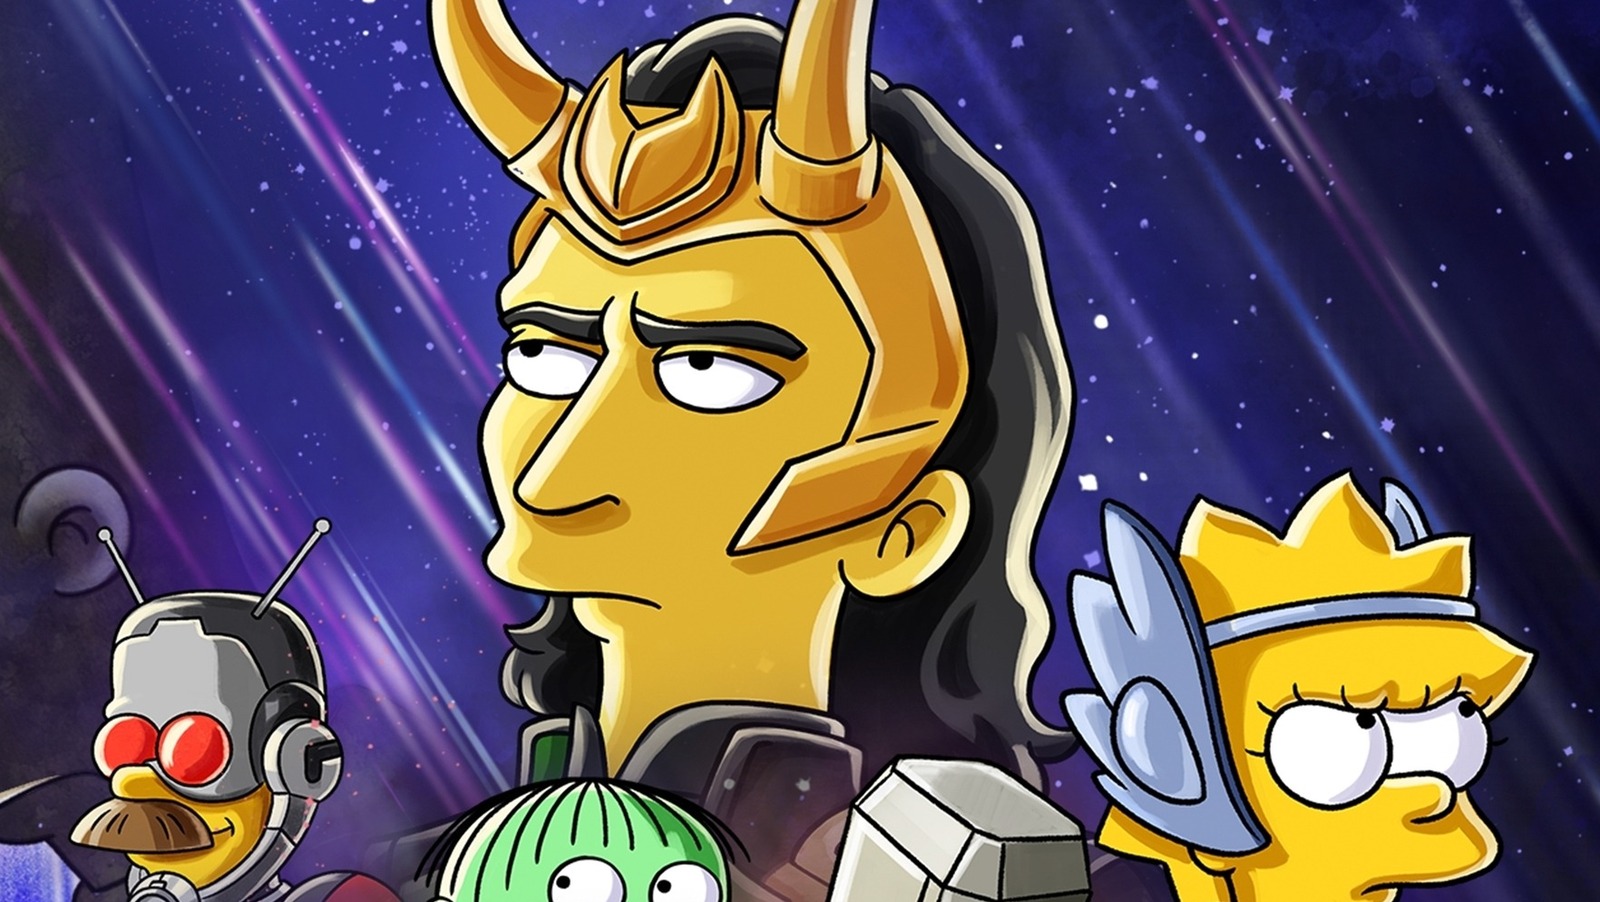 Disney Breaks The Multiverse With New Simpsons And Loki Crossover 